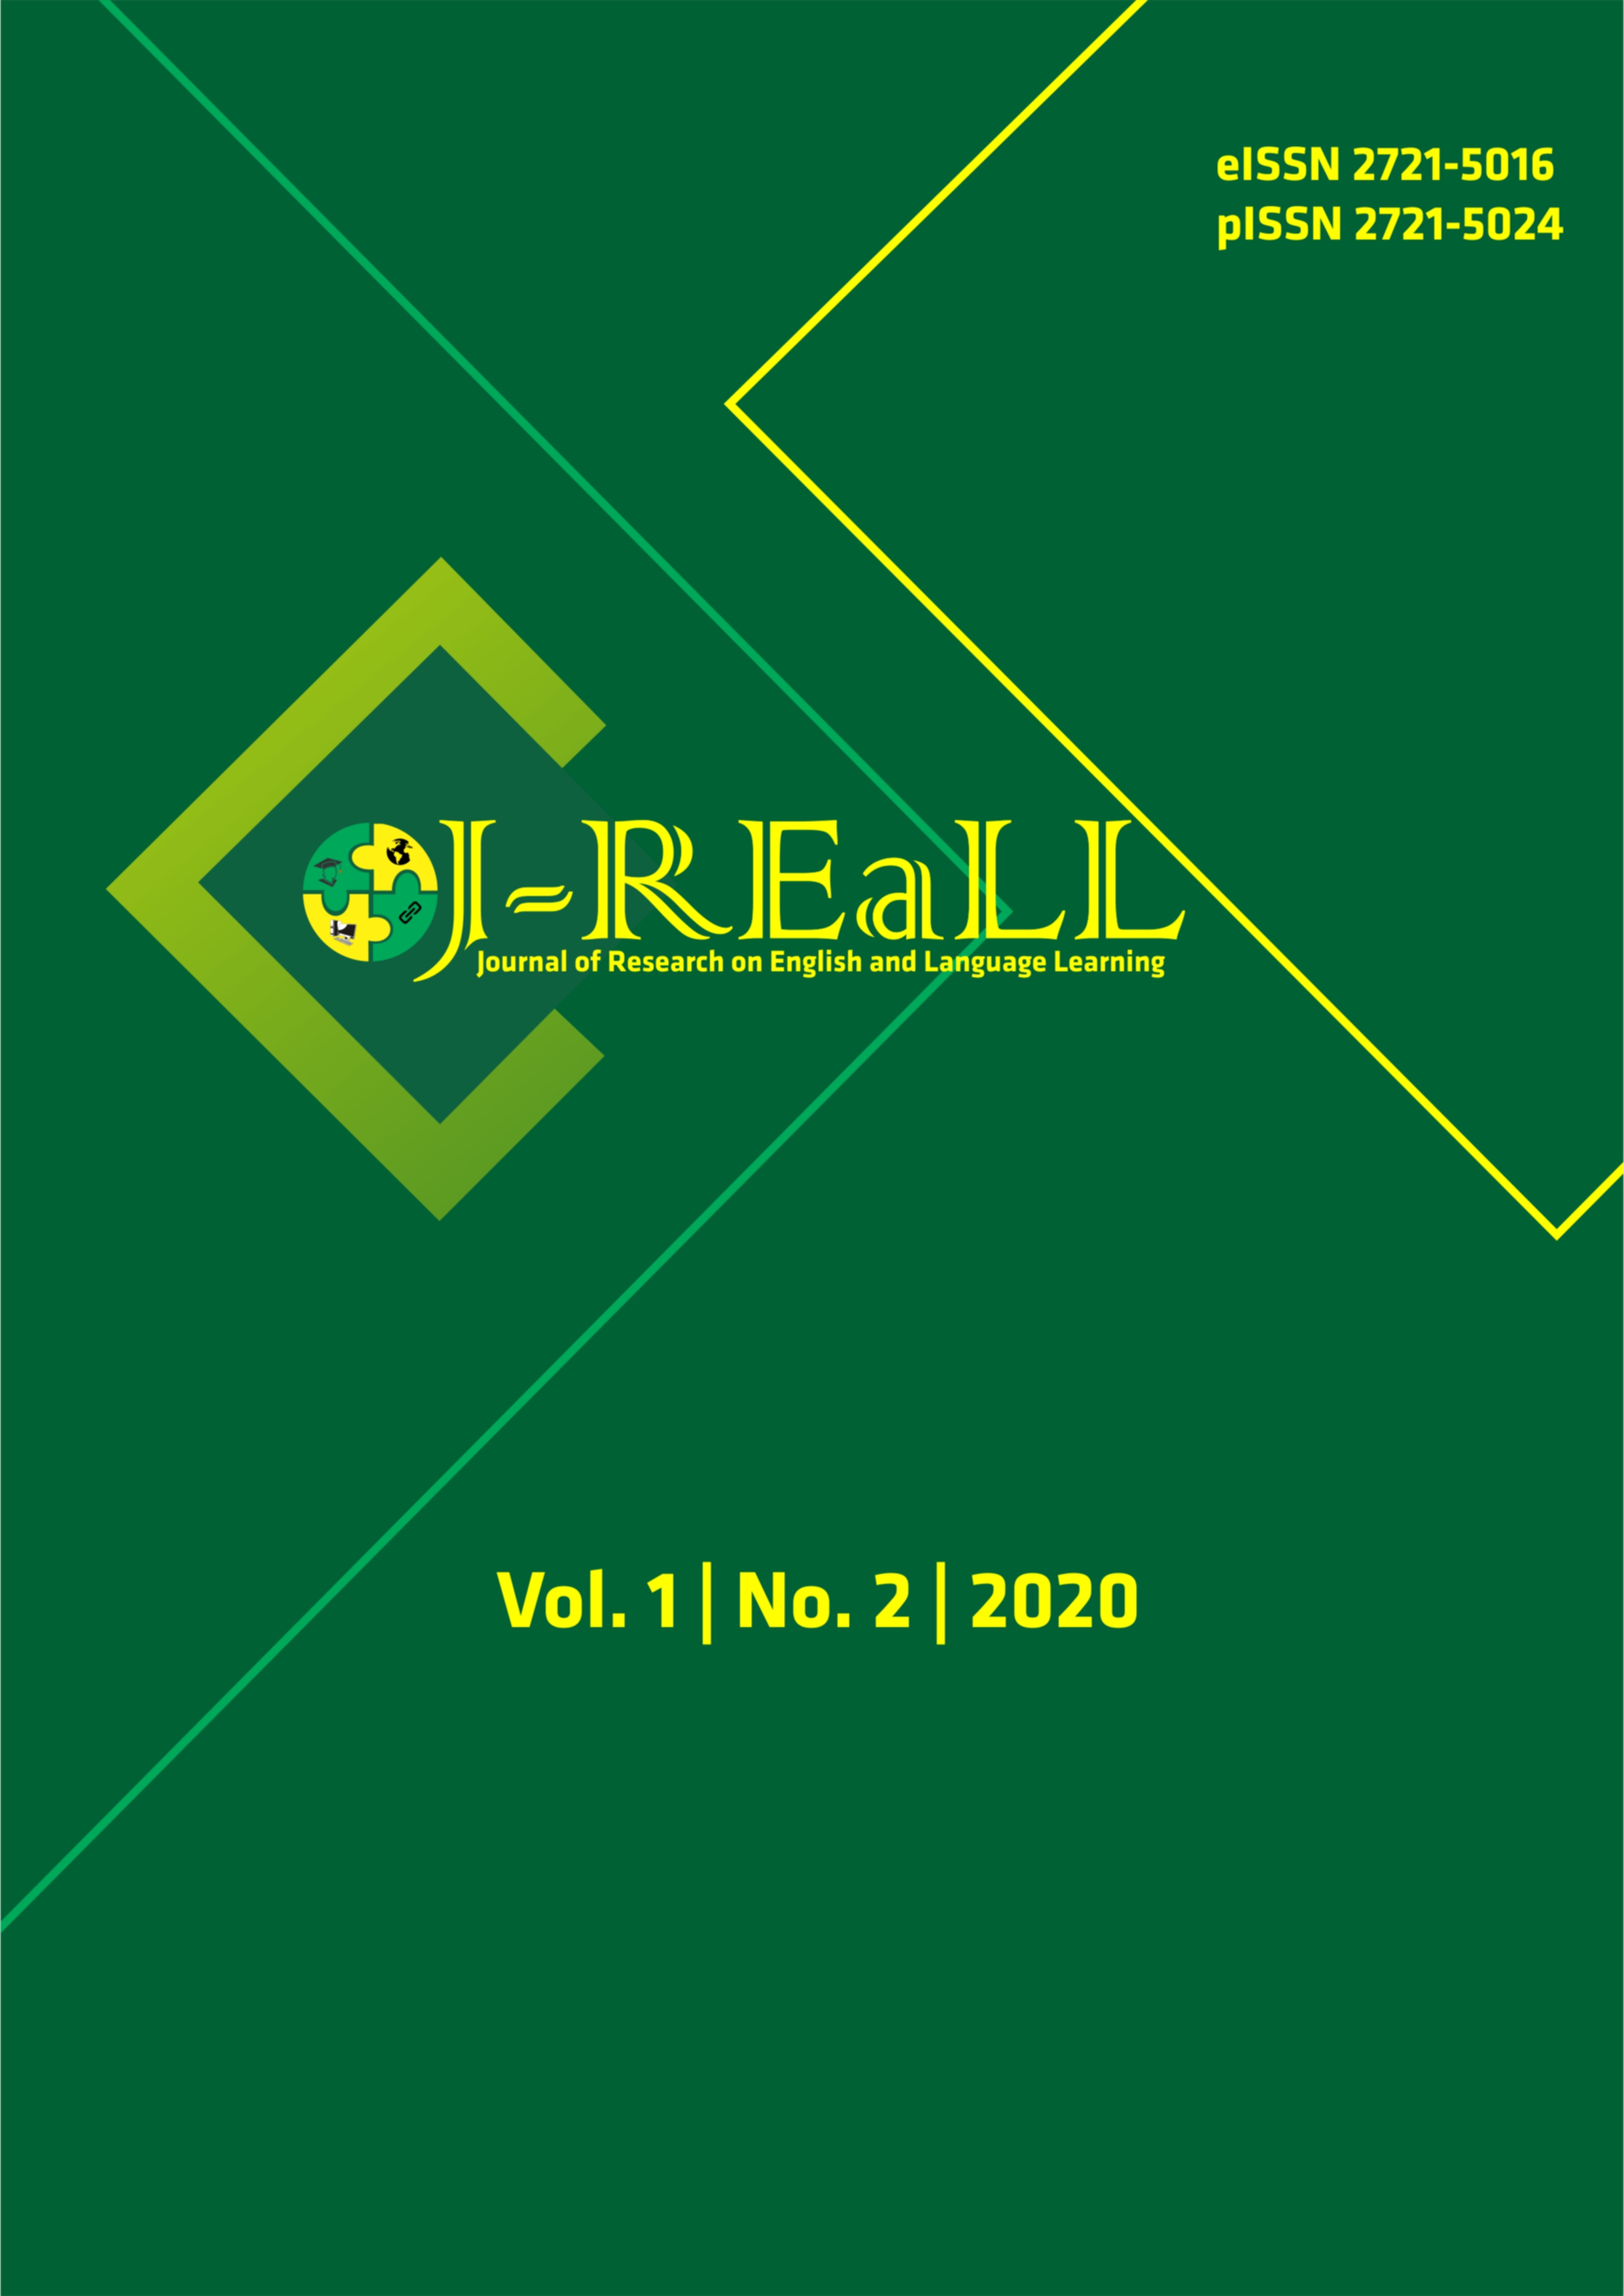 					View Vol. 1 No. 2 (2020): Journal of Research on English and Language Learning (J-REaLL)
				